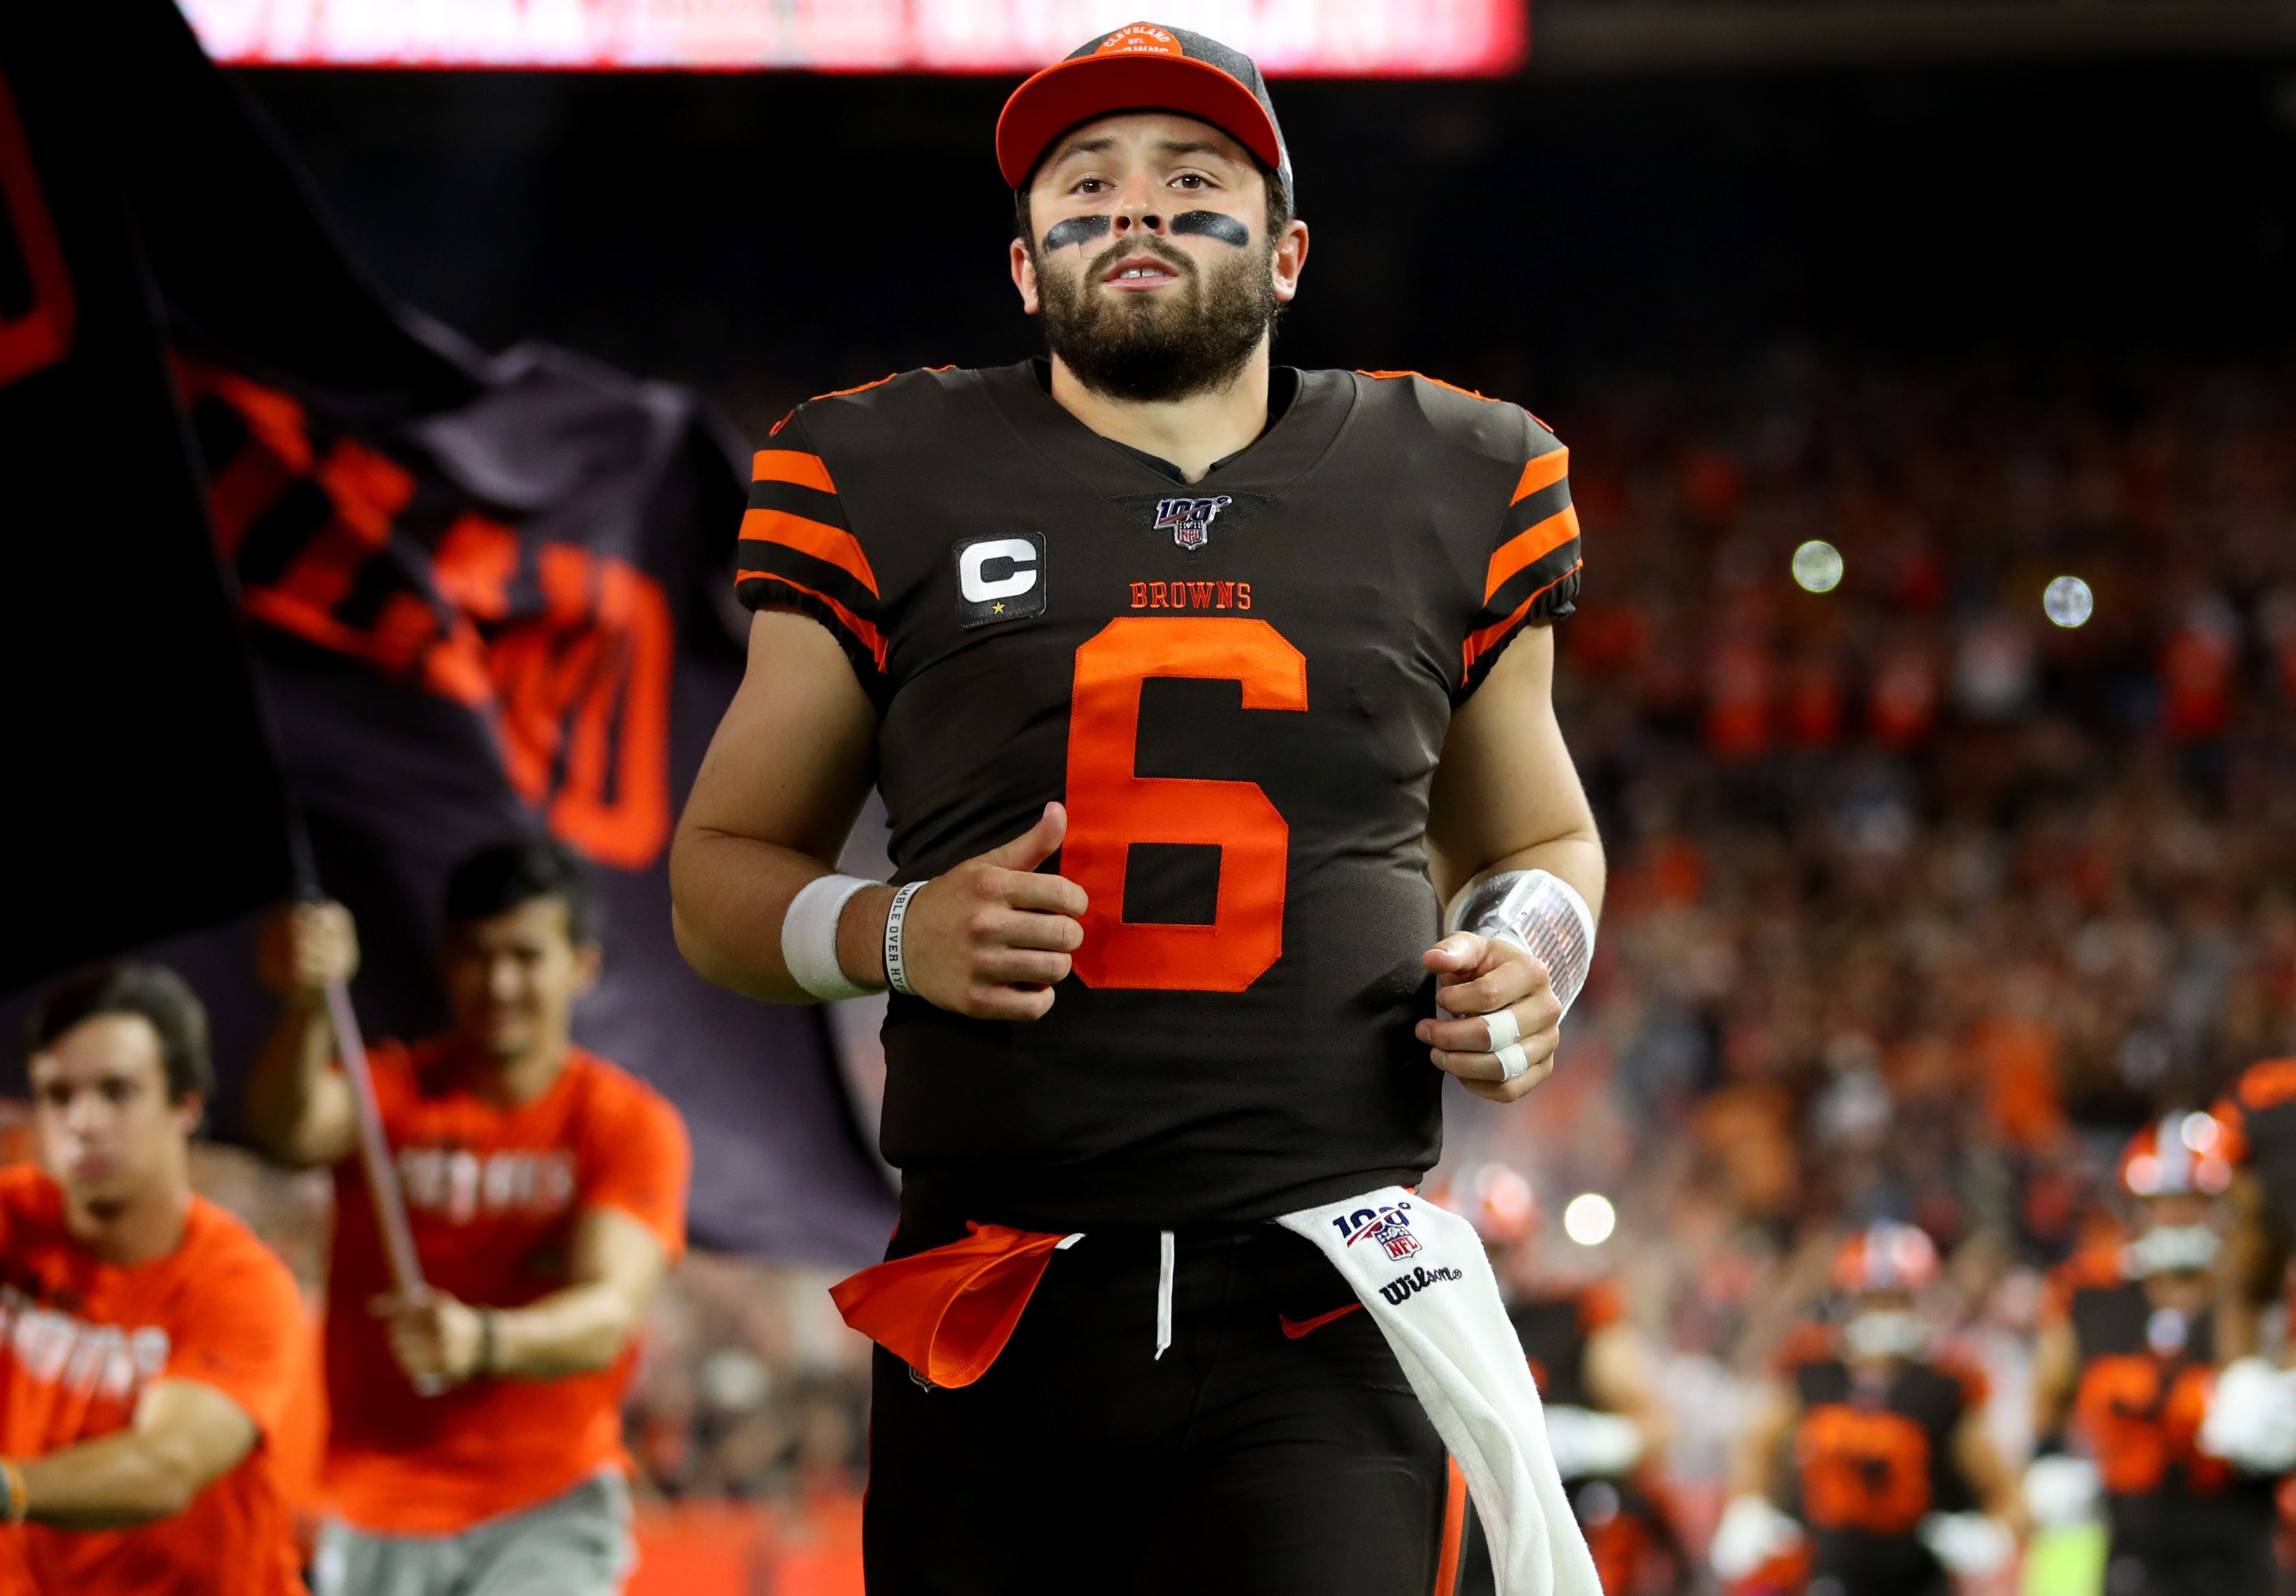 Cleveland Browns: Baker Mayfield refinding his underdog mentality?